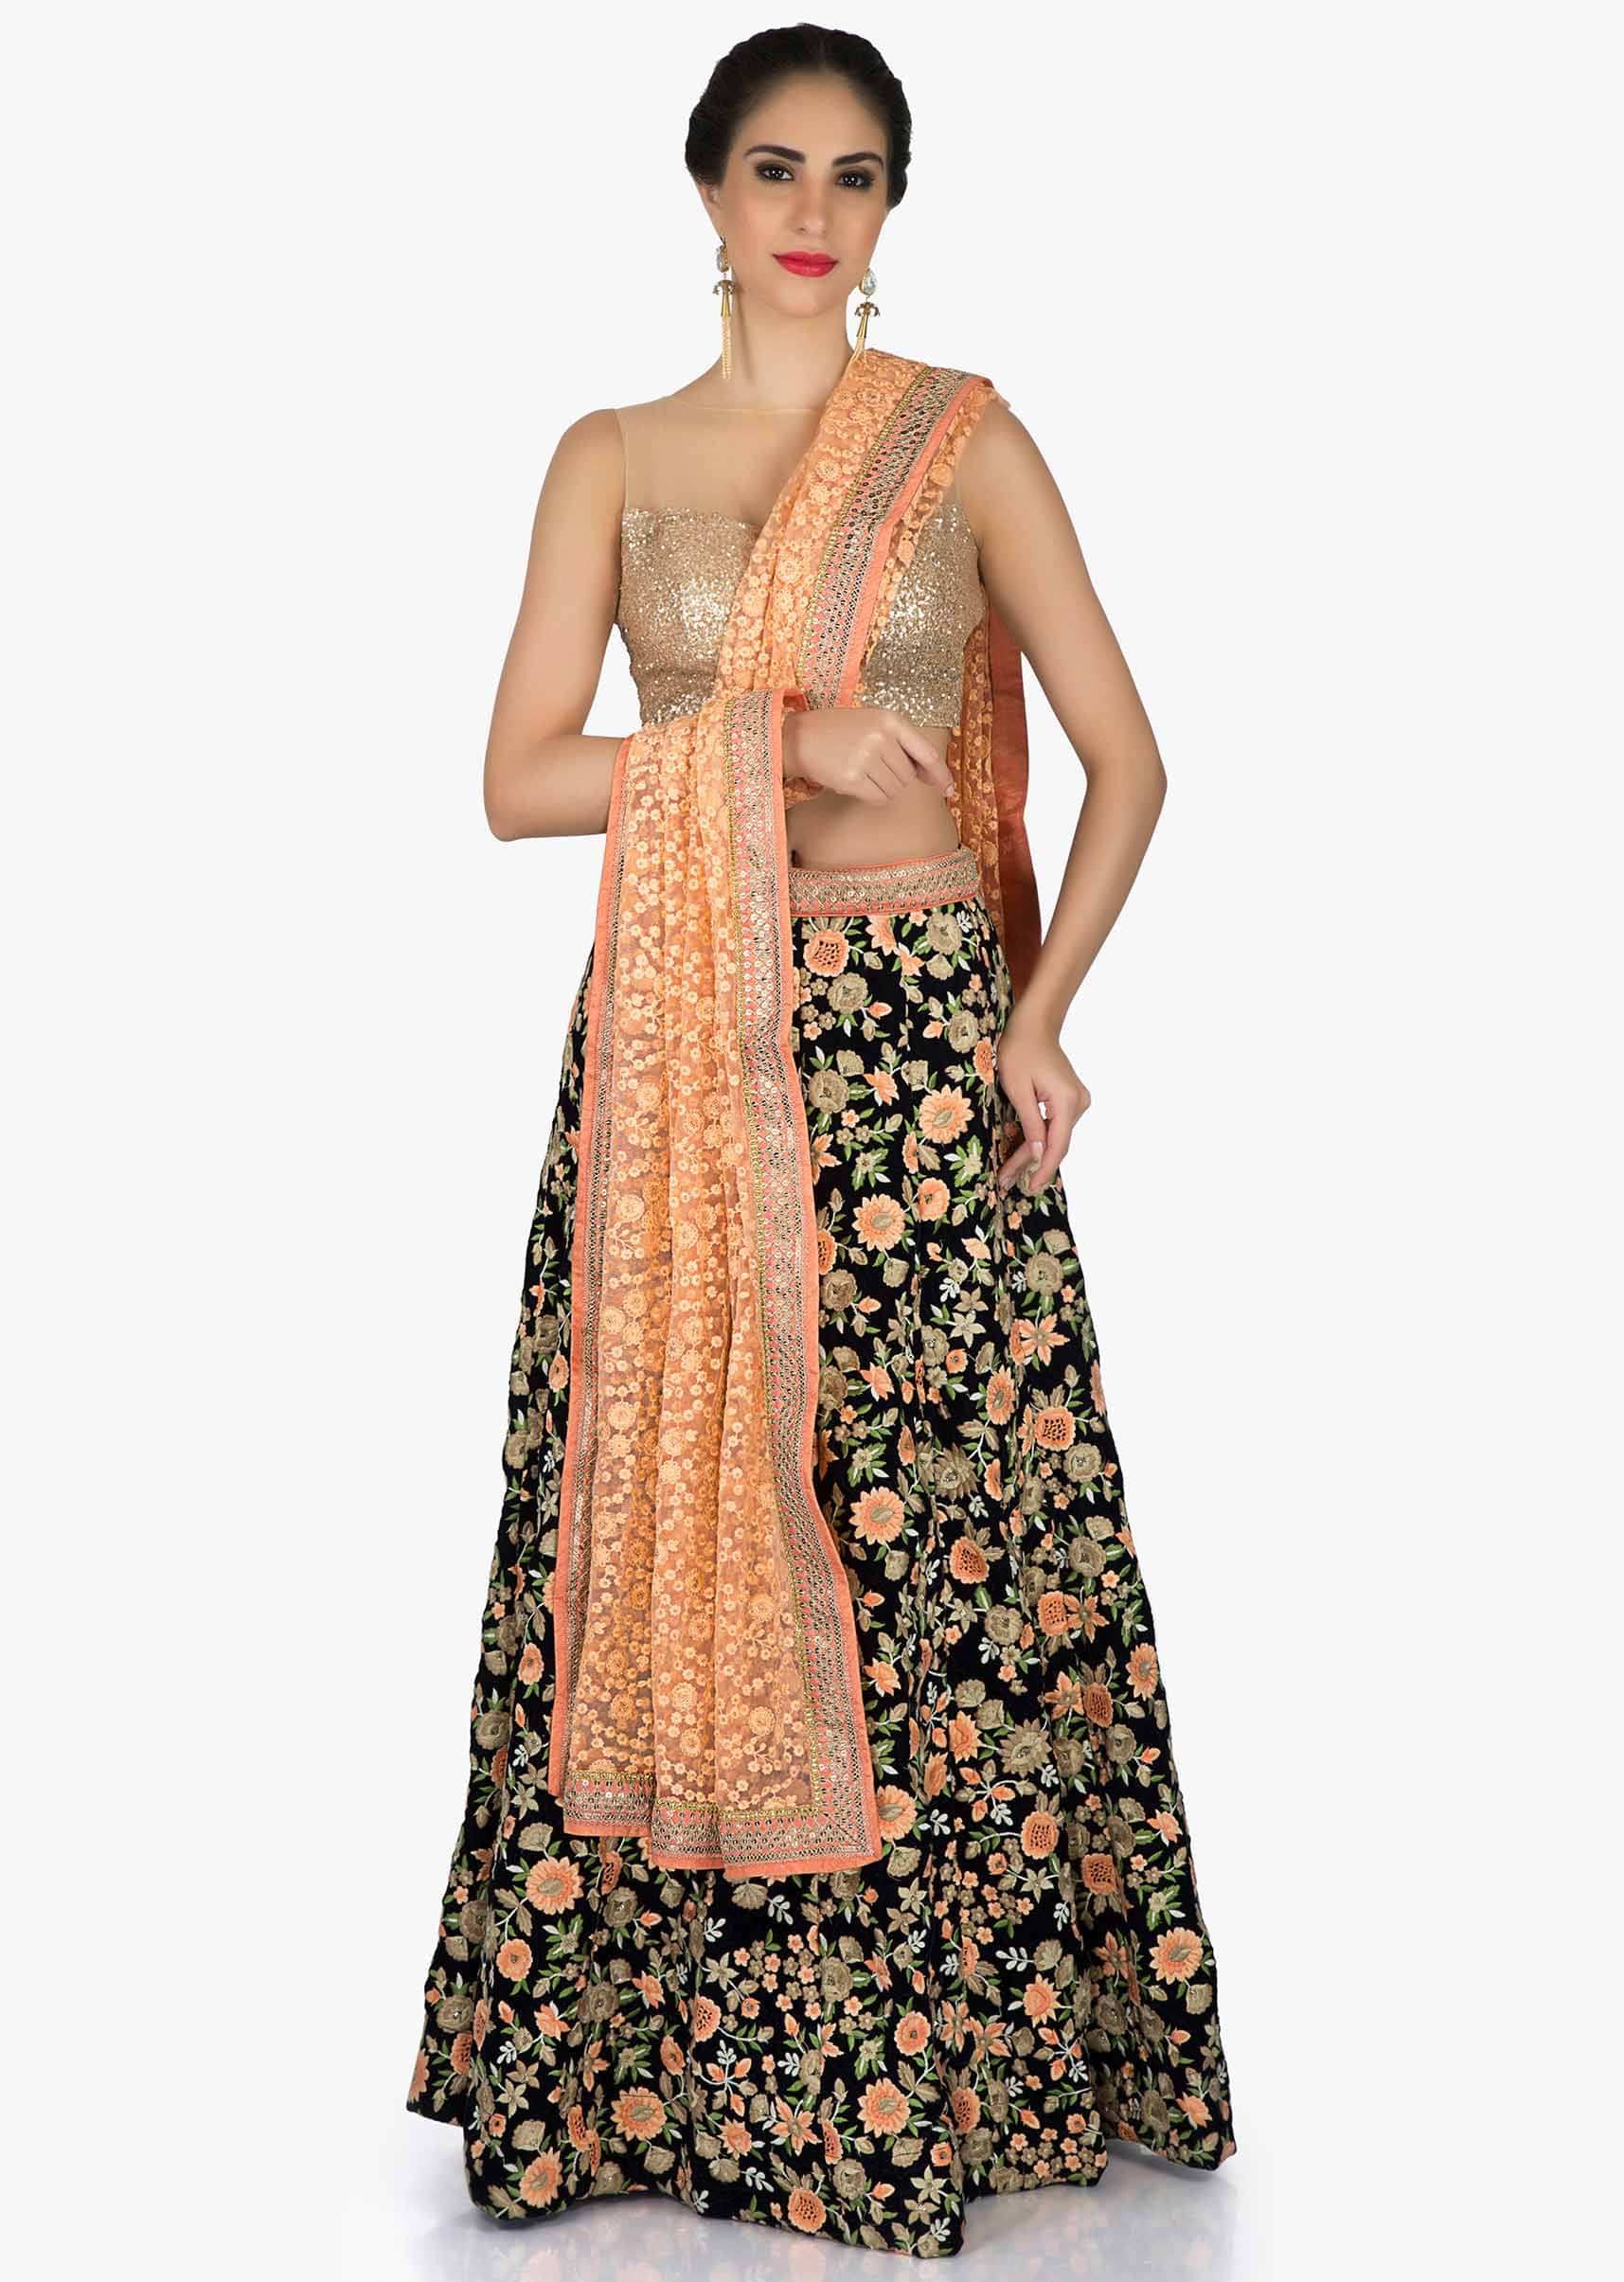 Mid night blue lehenga in floral resham work with contrast blouse  only on Kalki